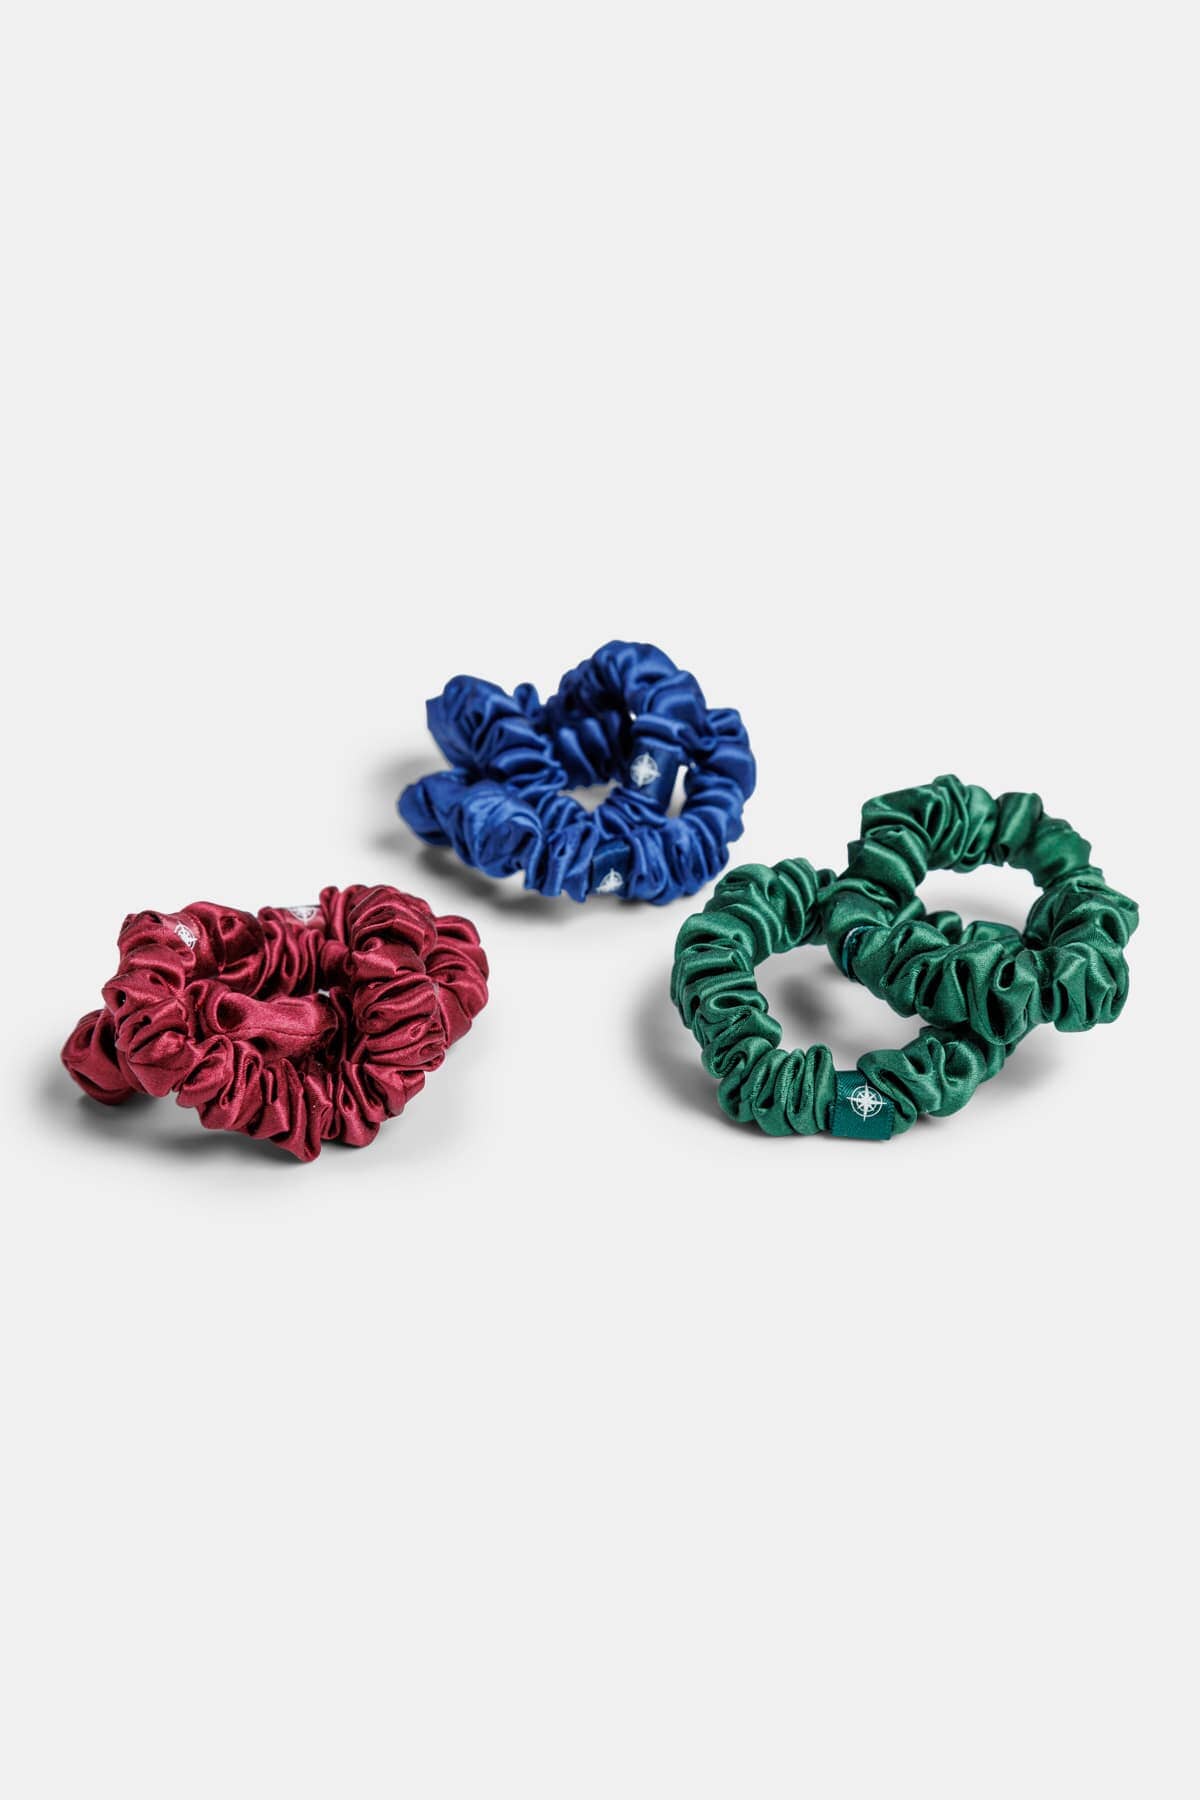 100% Pure Mulberry Silk Hair Scrunchies with Gift Box - Set of 6 Skinny Hair Ties Womens>Beauty>Hair Care Fishers Finery 